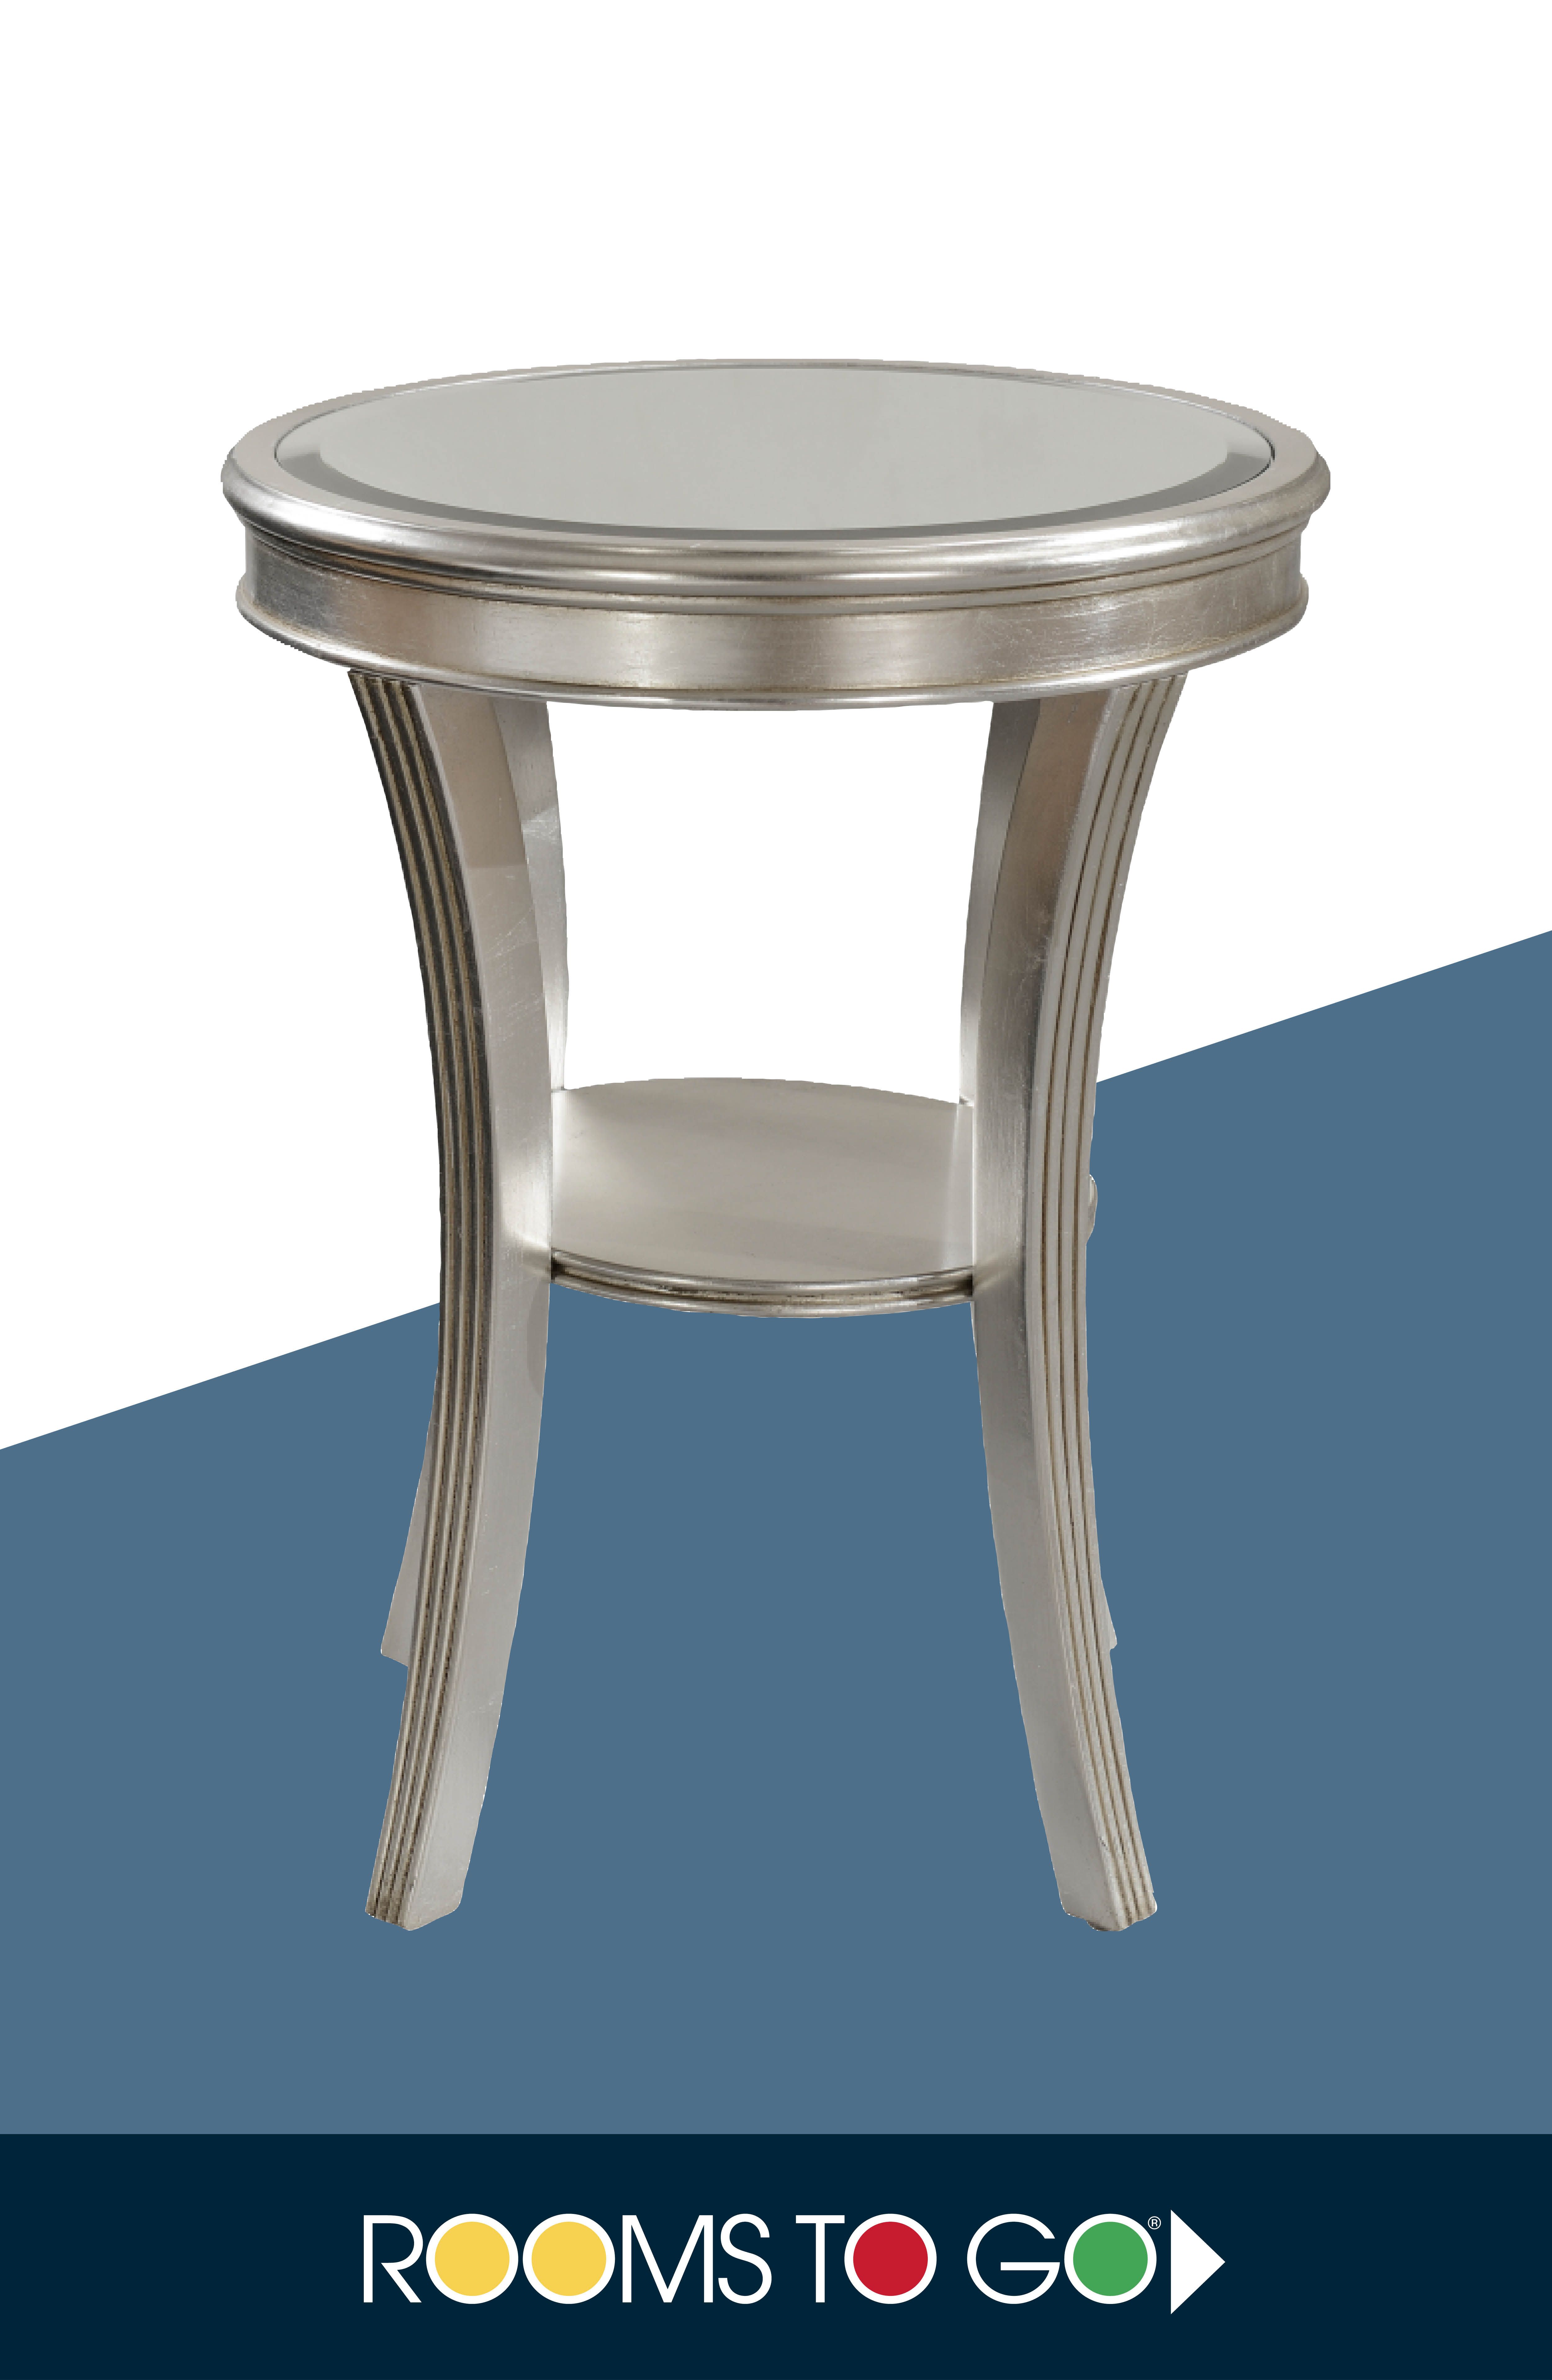 waterbury silver accent table entertaining decor small with towering splayed legs and leaf finish this makes big style statement chairs diy marble coffee round metal side grey